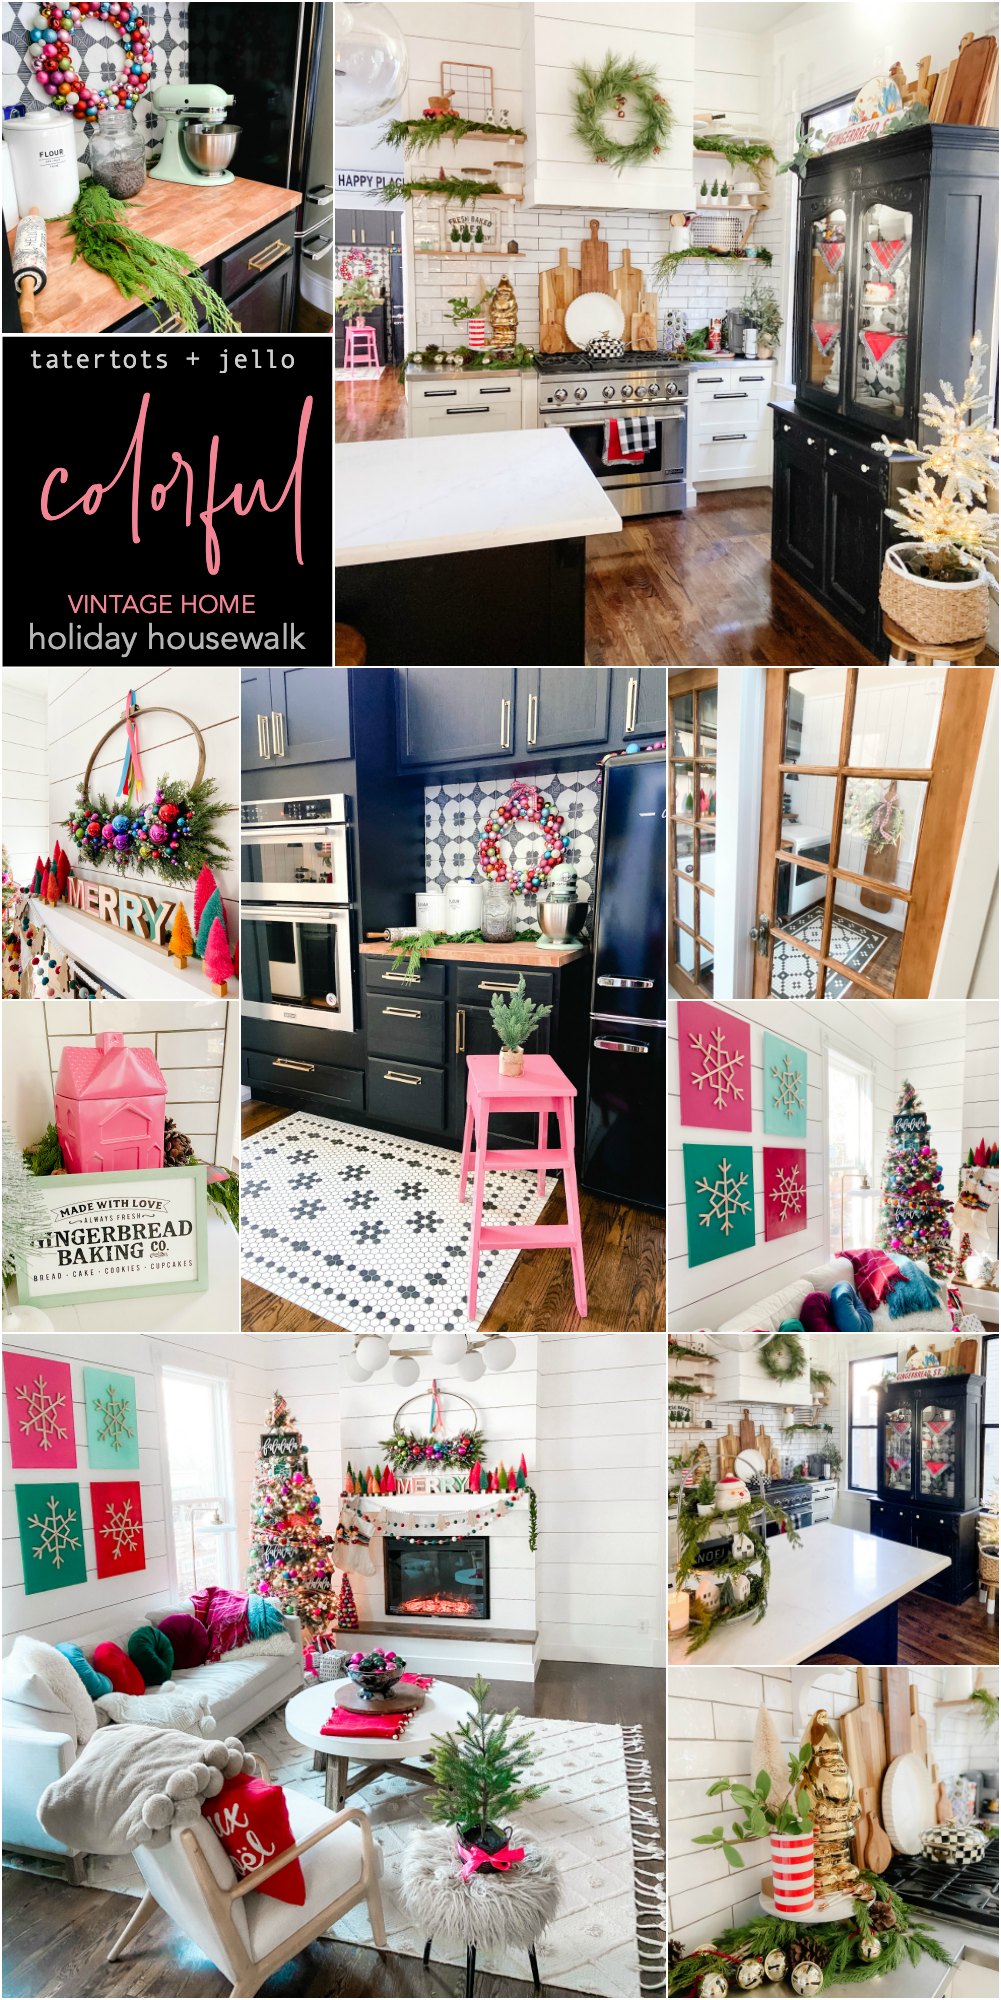 Bright and Colorful Holiday Housewalk Tour. Add bright and happy colors to your home with easy DIY projects to celebrate the holidays.